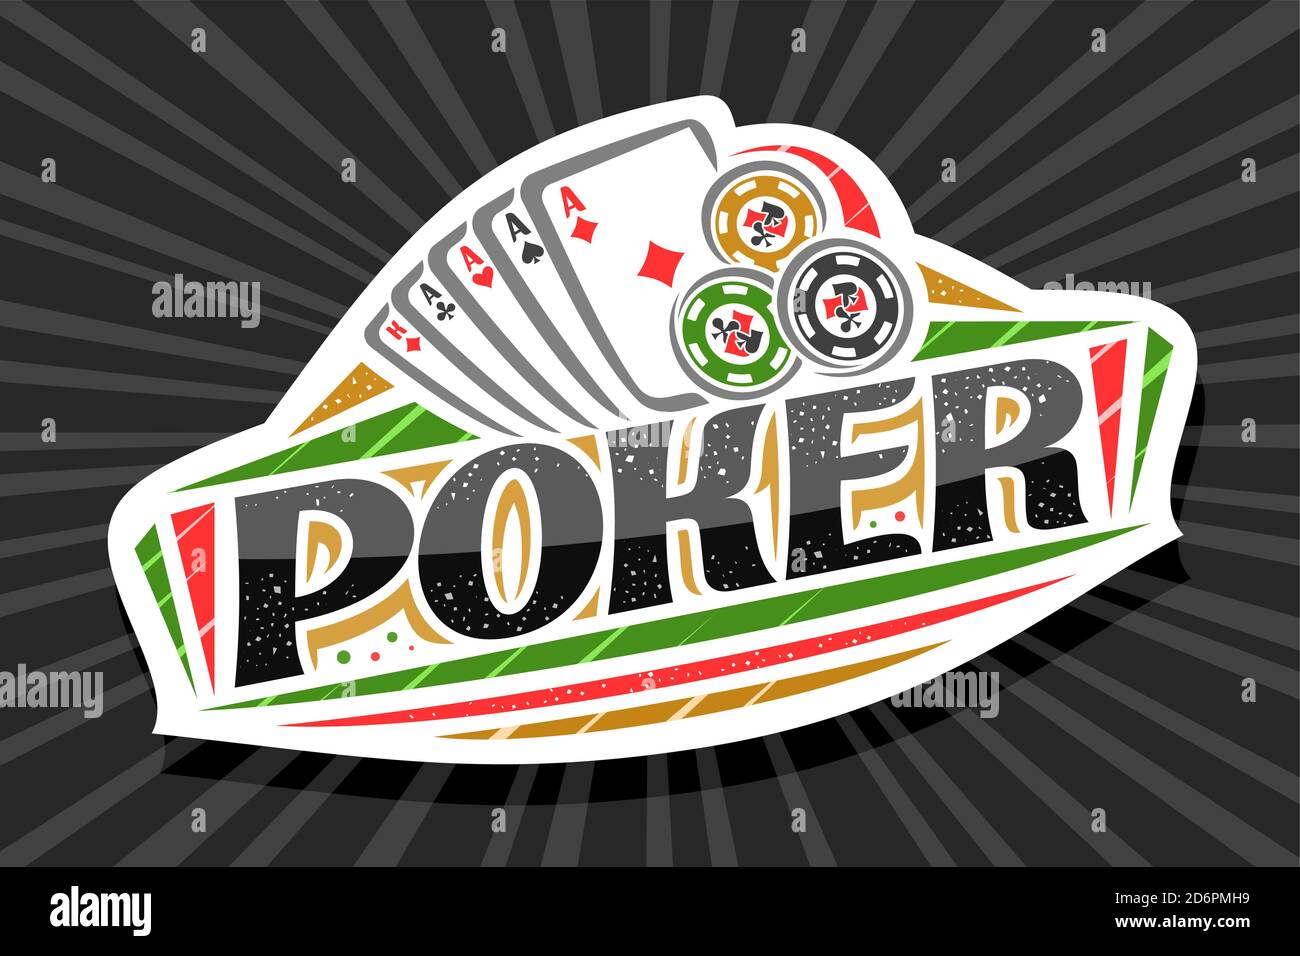 Vector logo for Poker Gamble, white modern badge with illustration of playing cards and chips, unique lettering for black word poker, gamble sign boar Stock Vector